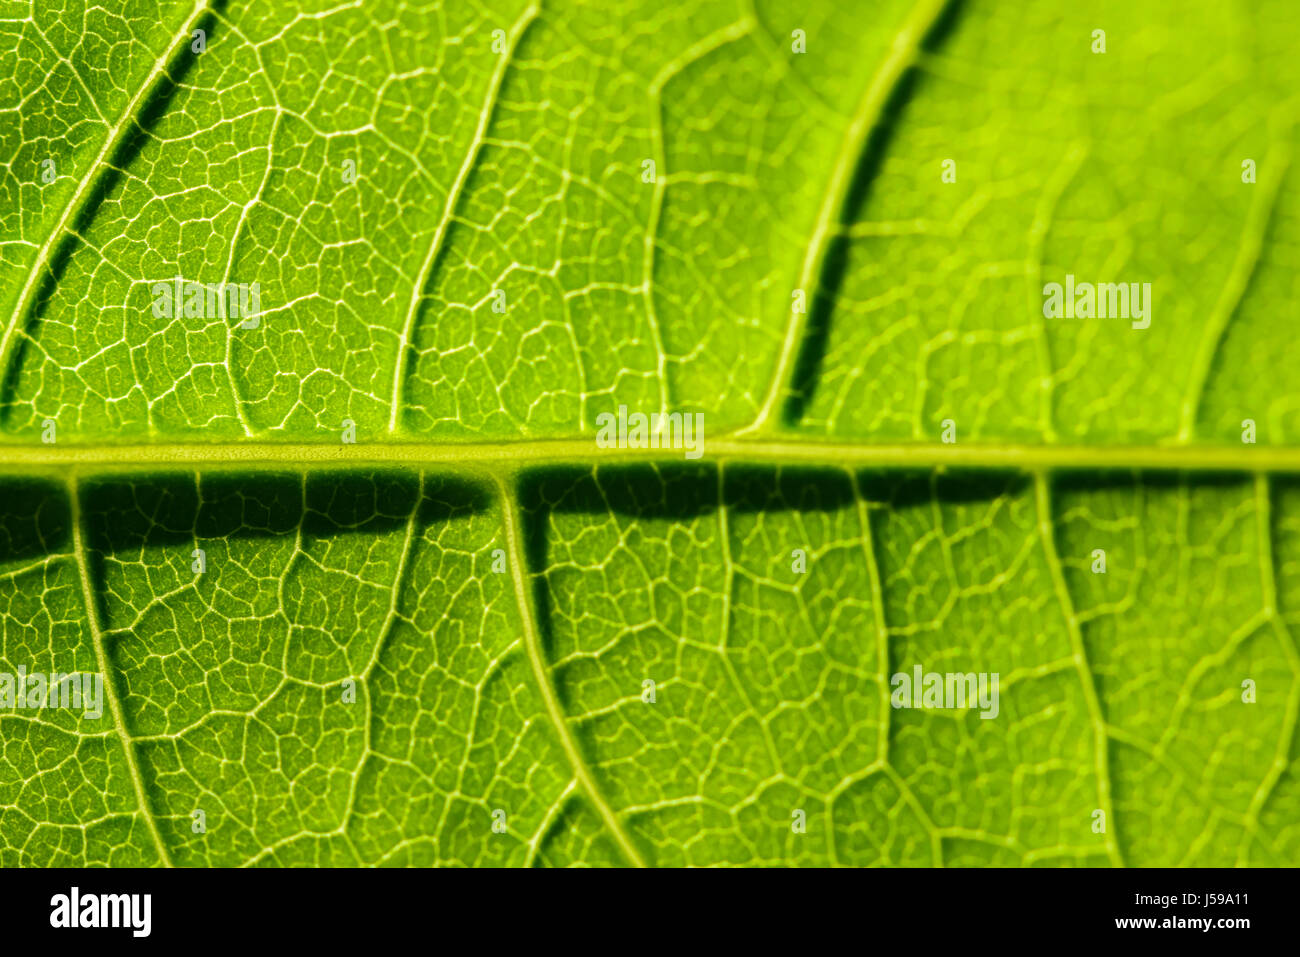 Green Leaf Texture With Visible Stomata Covering The Outer Epidermis Layer Stock Photo